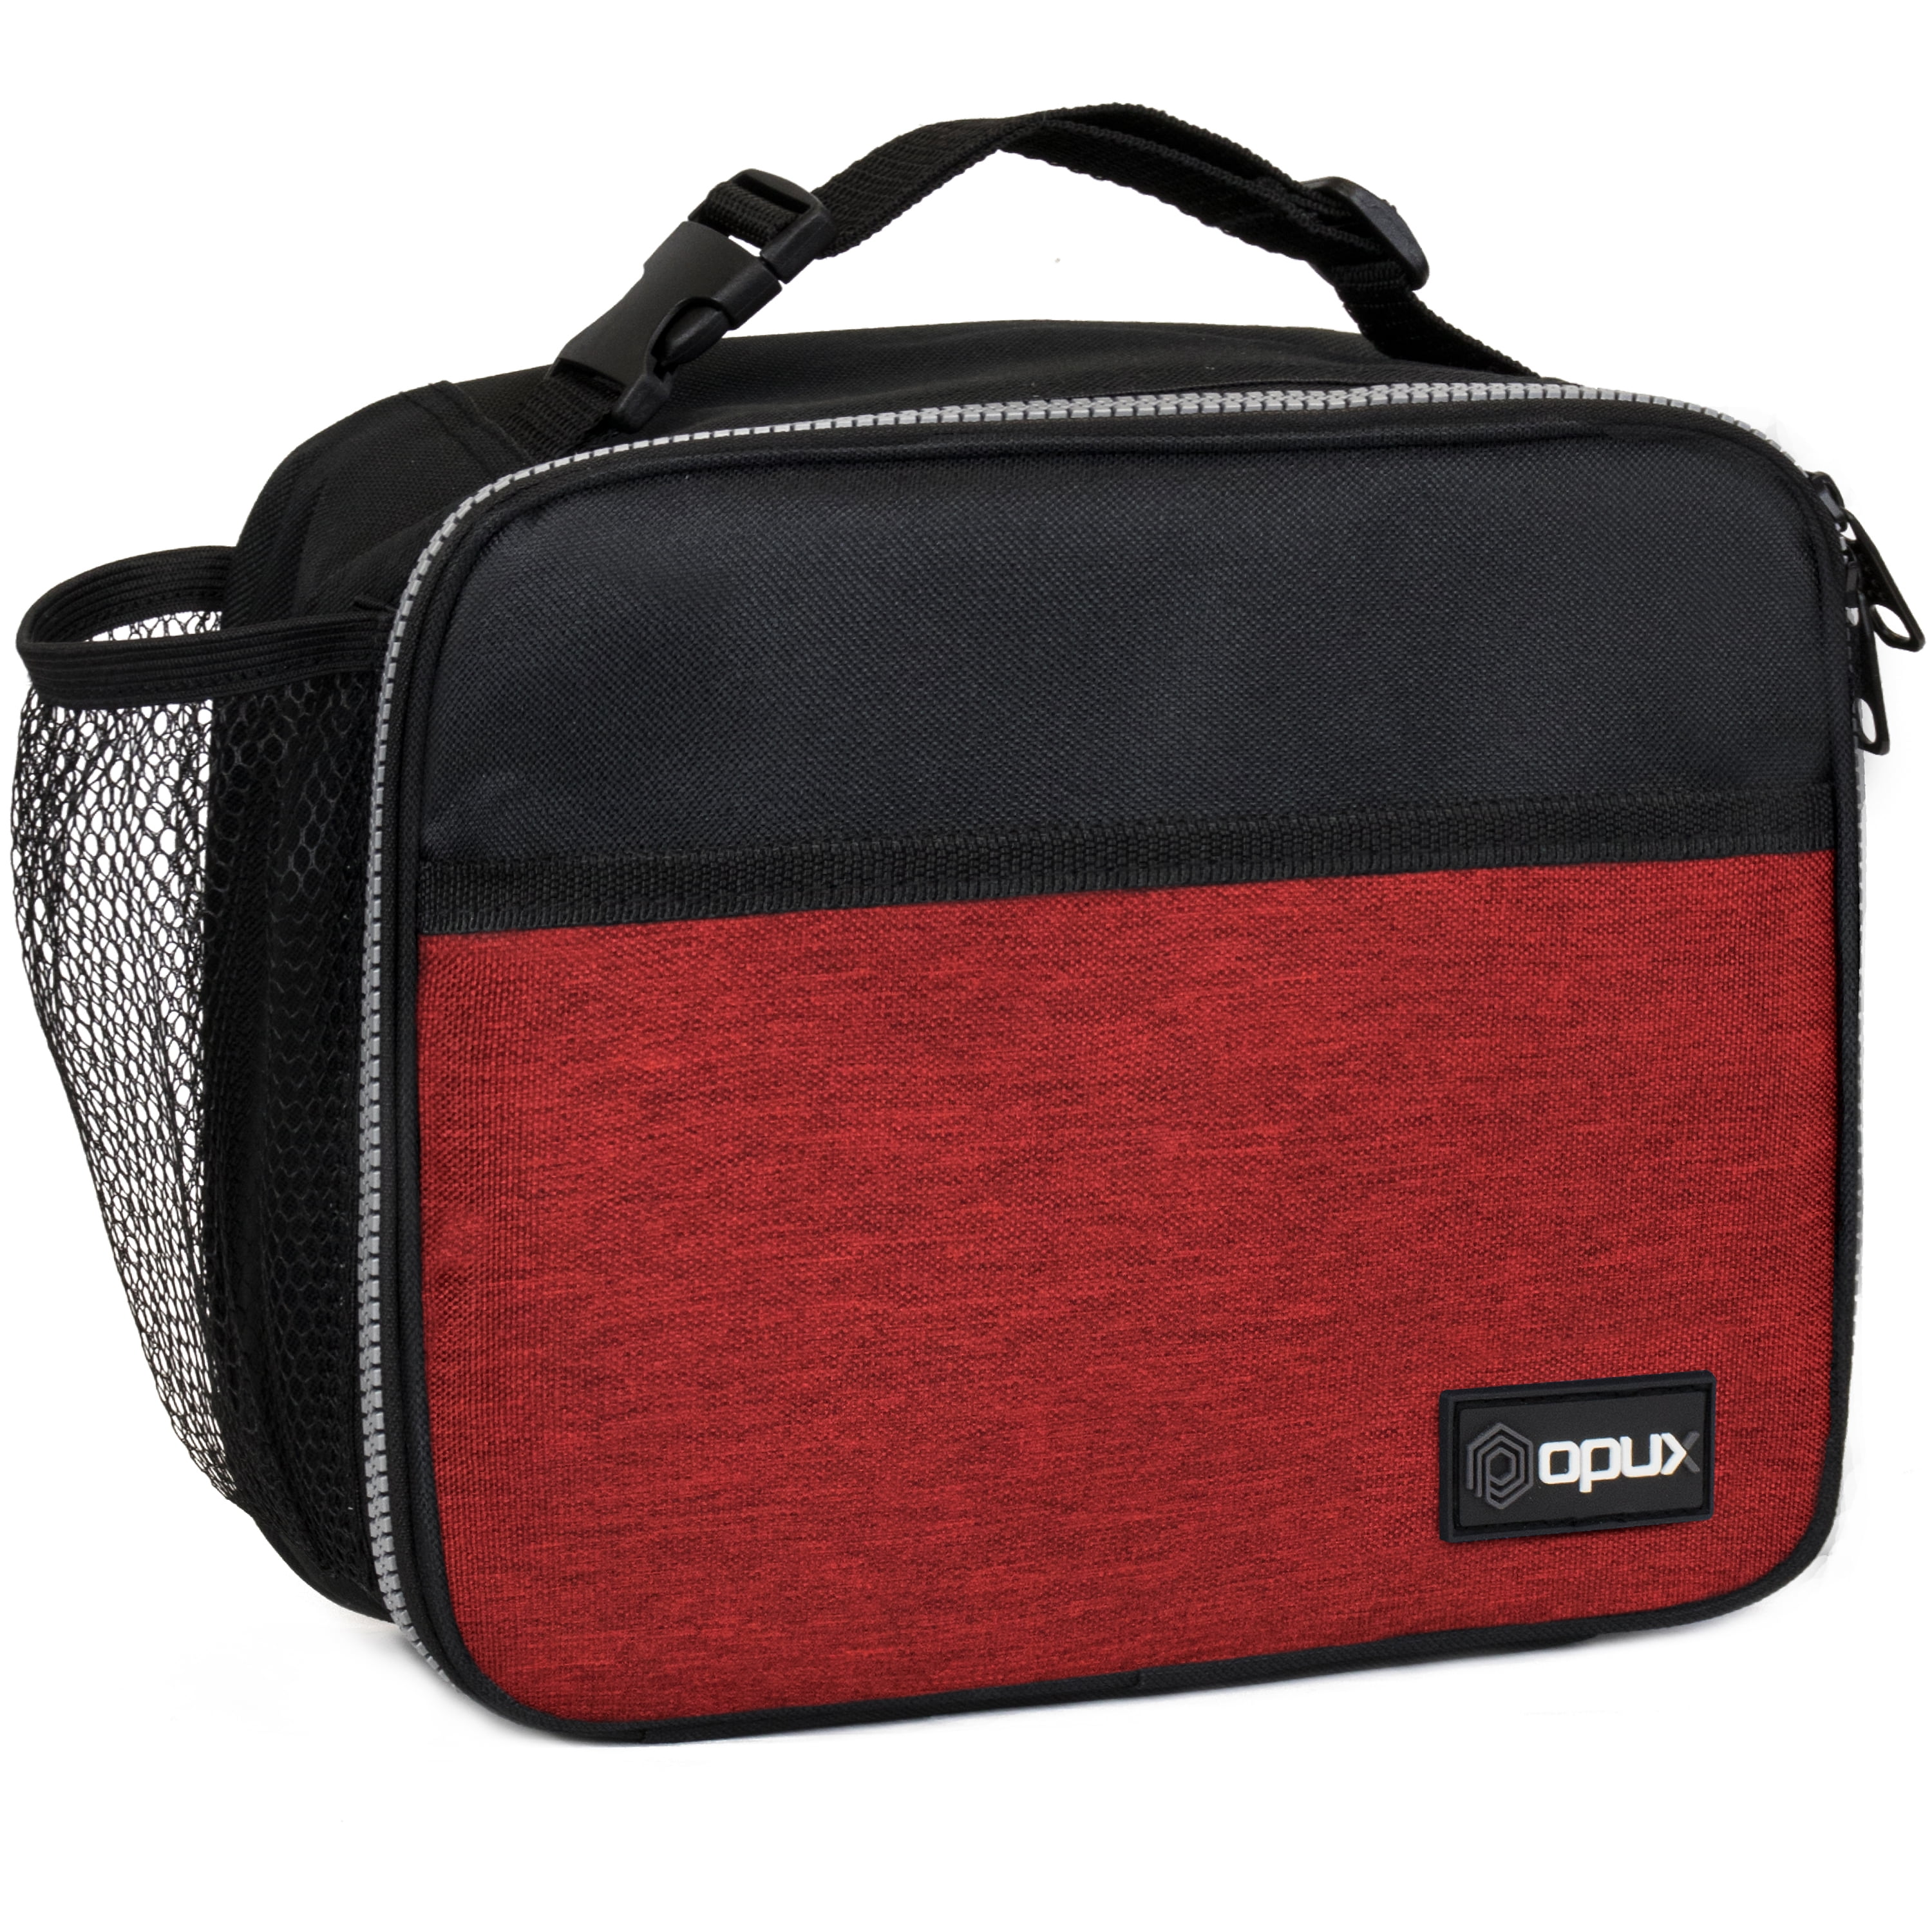 MIER Large Lunch Box for Men Insulated Lunch Bags, Red Stripes